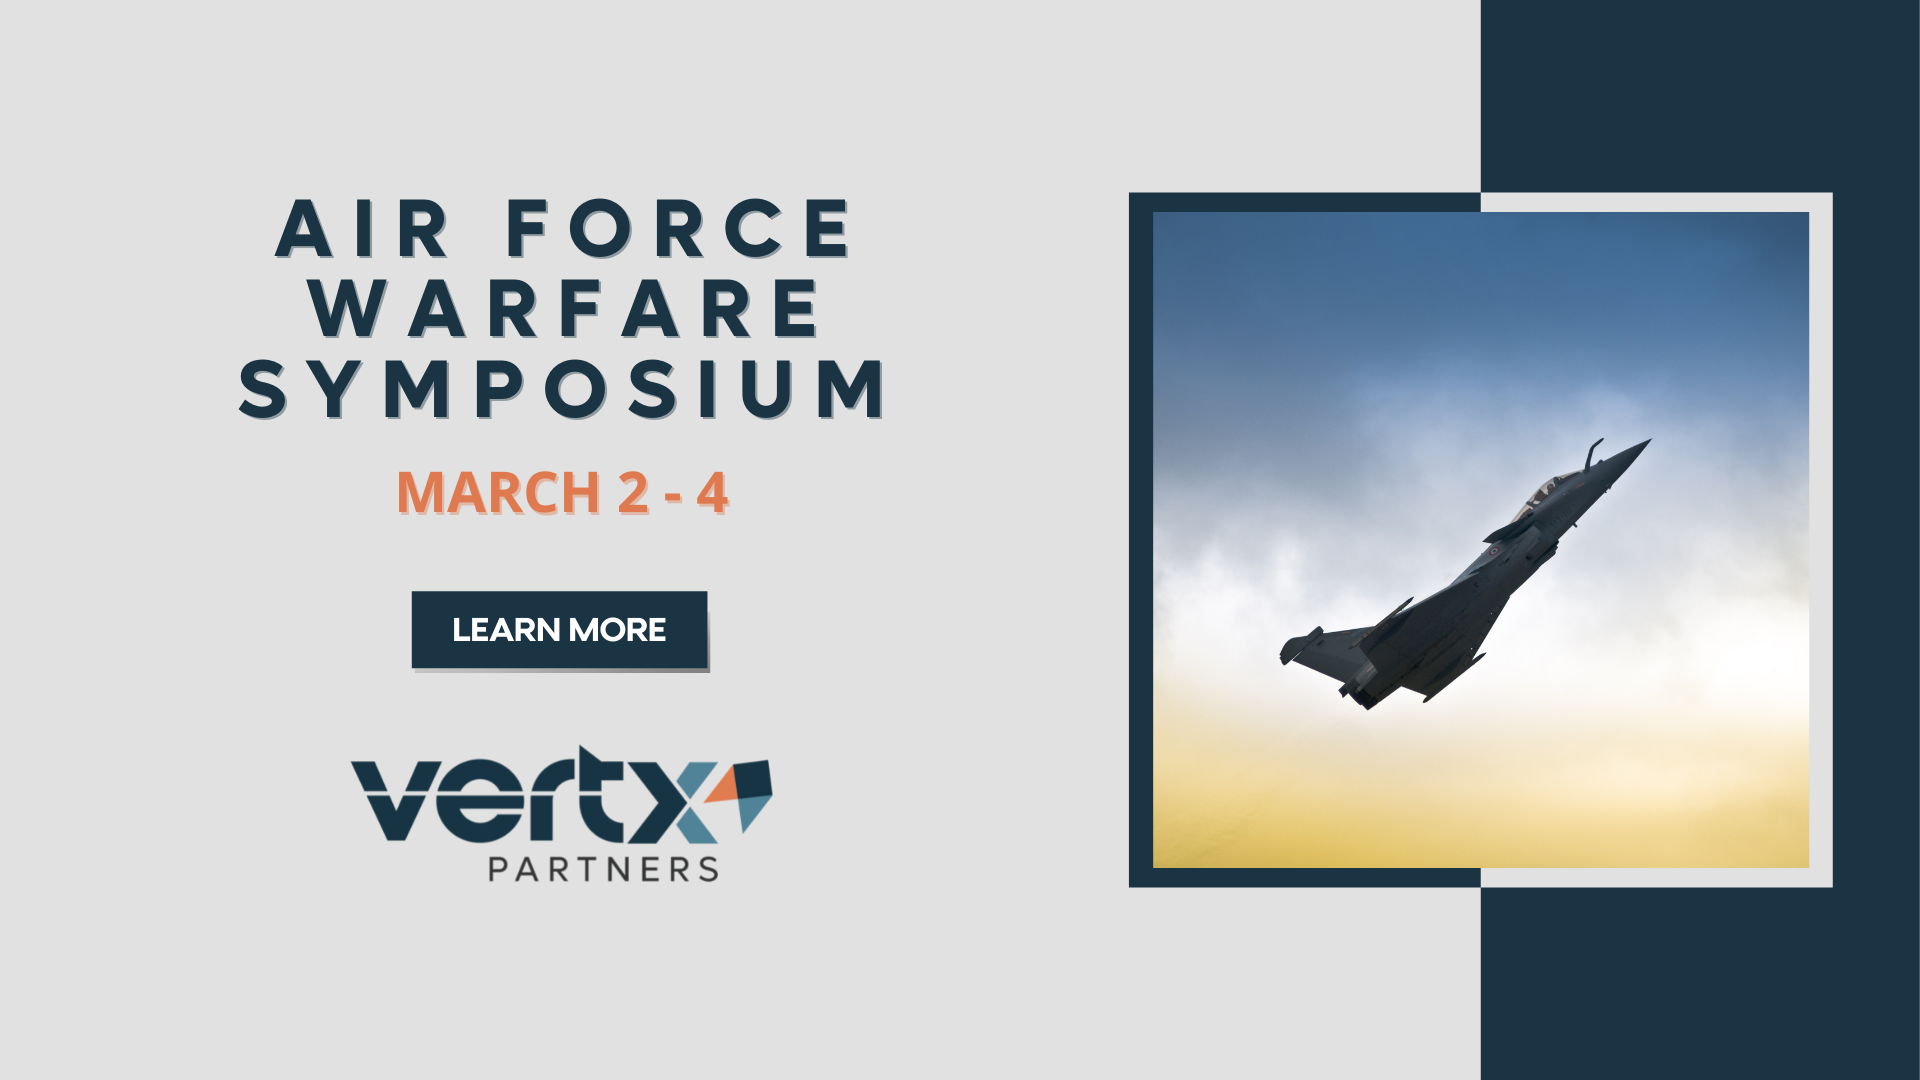 Graphic about an upcoming event in March with a fighter jet on it.